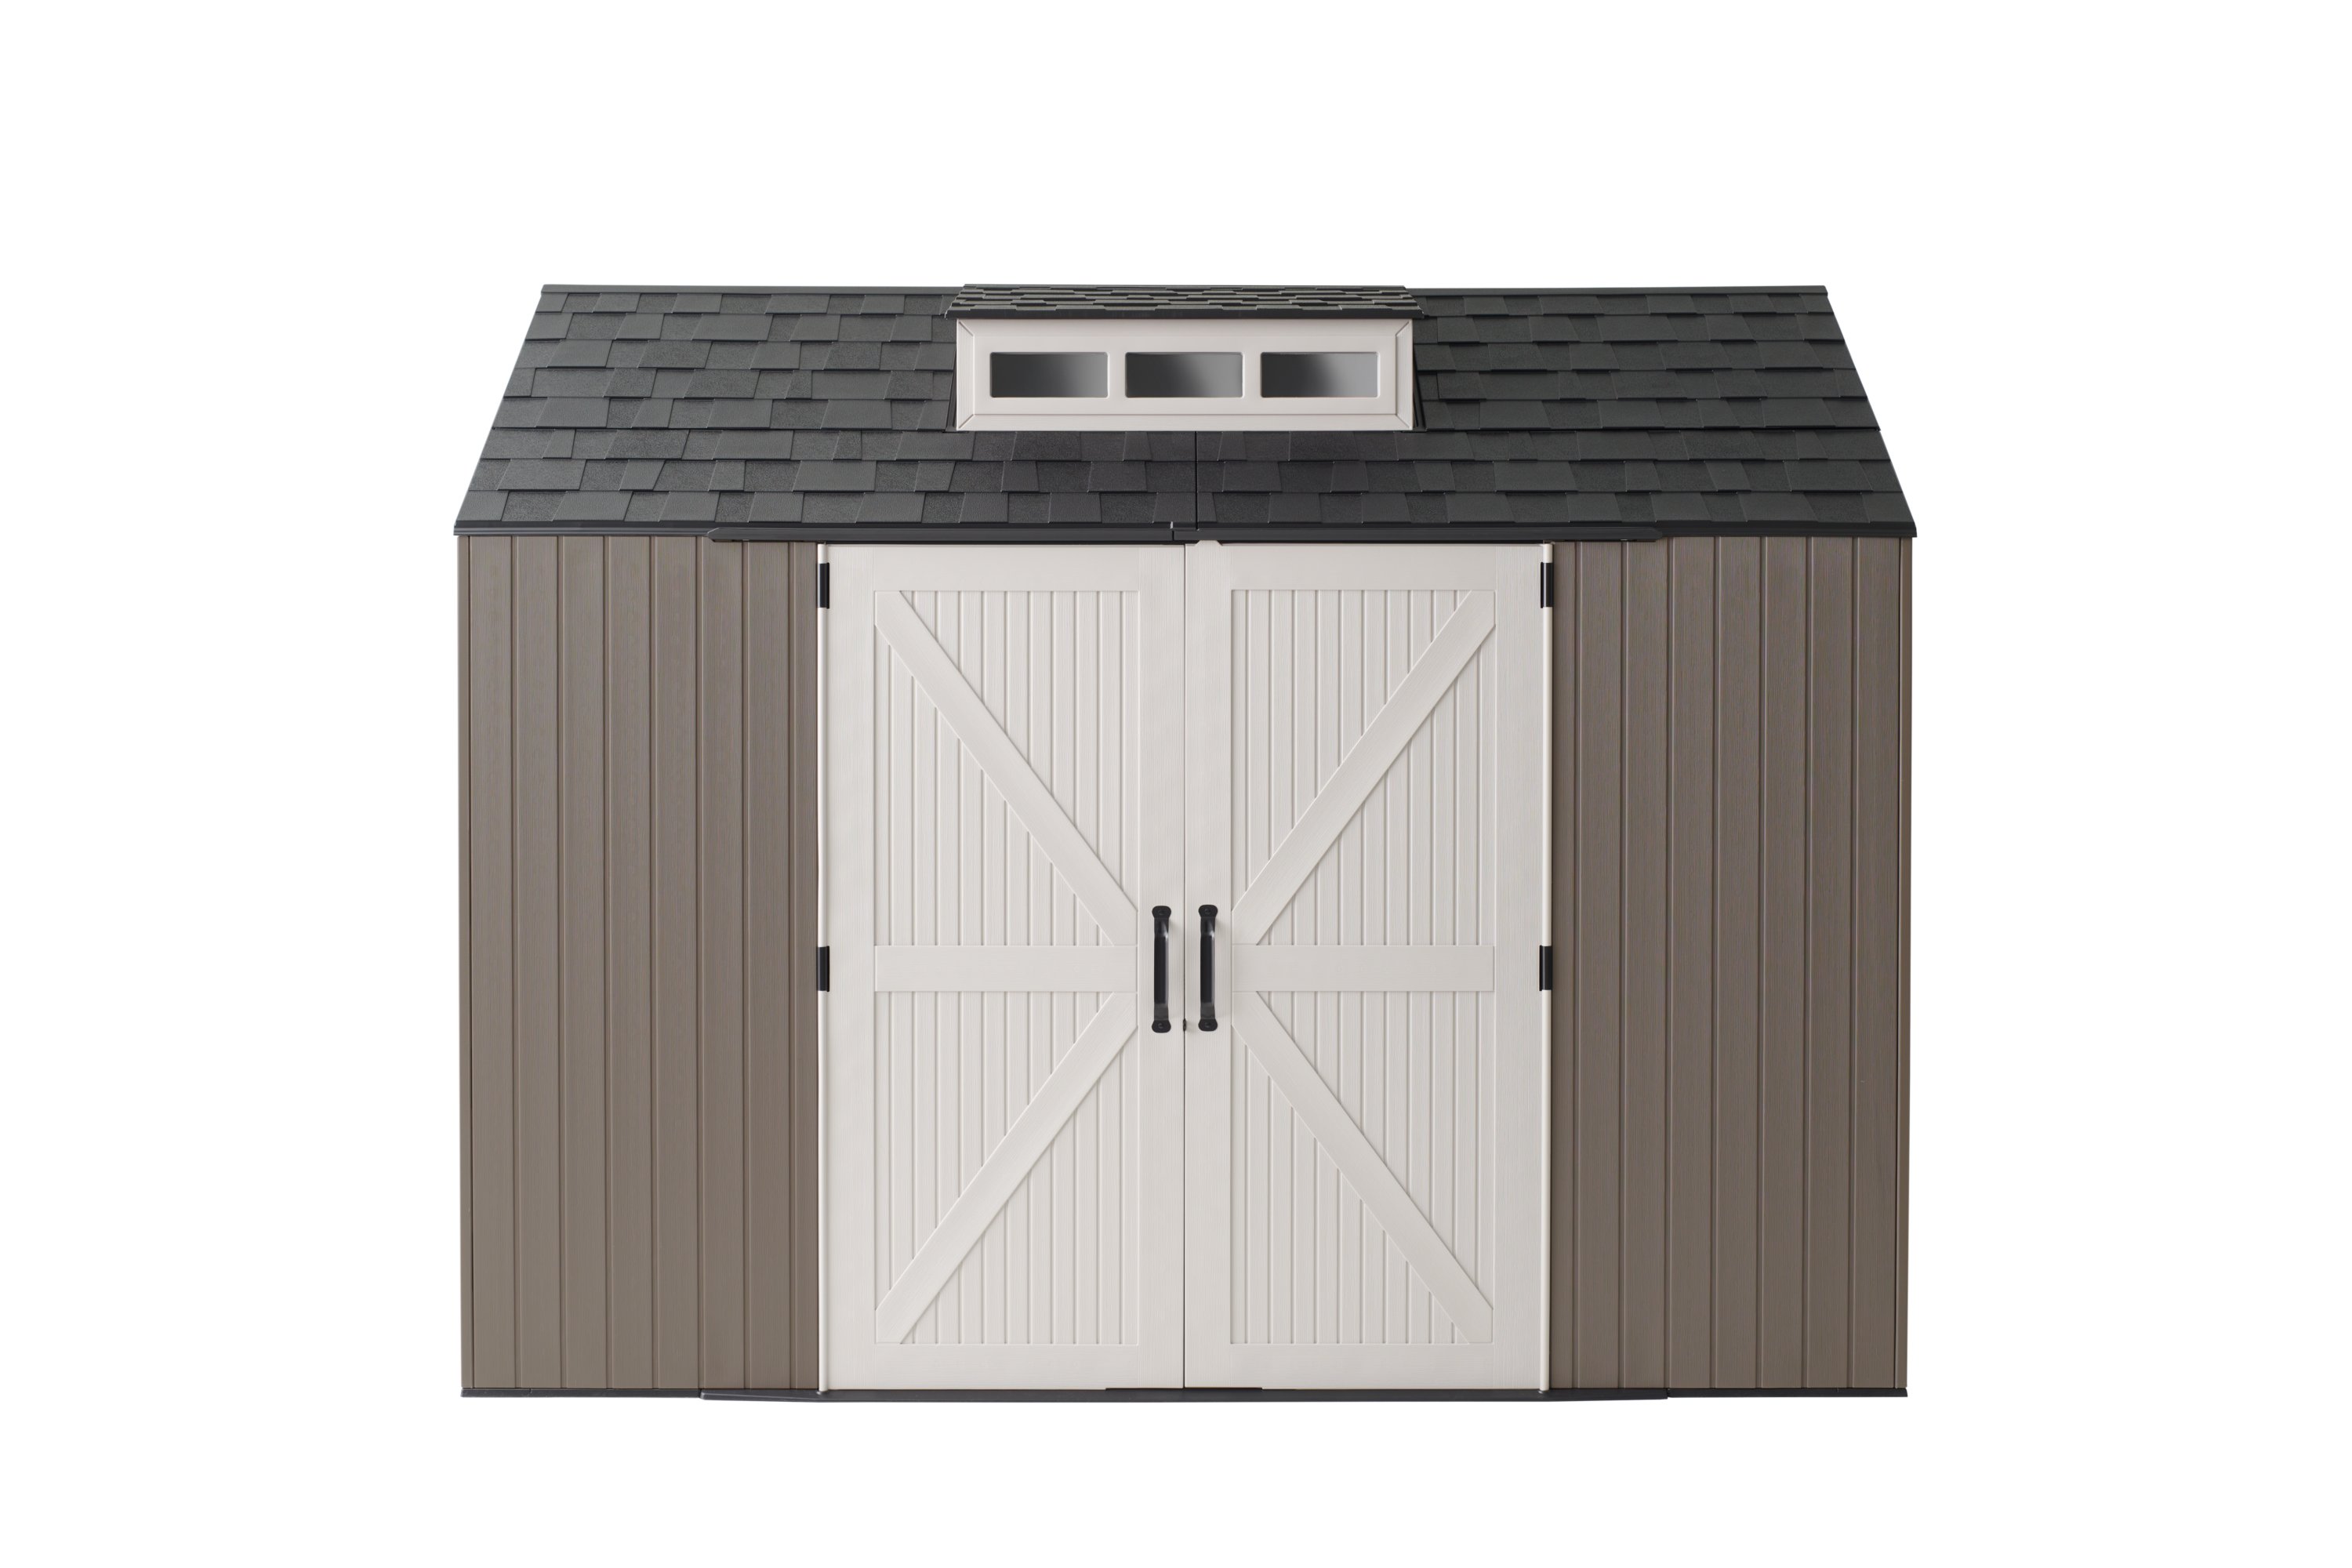 Rubbermaid 7x7 ft Durable Weather Resistant Resin Outdoor Storage Shed